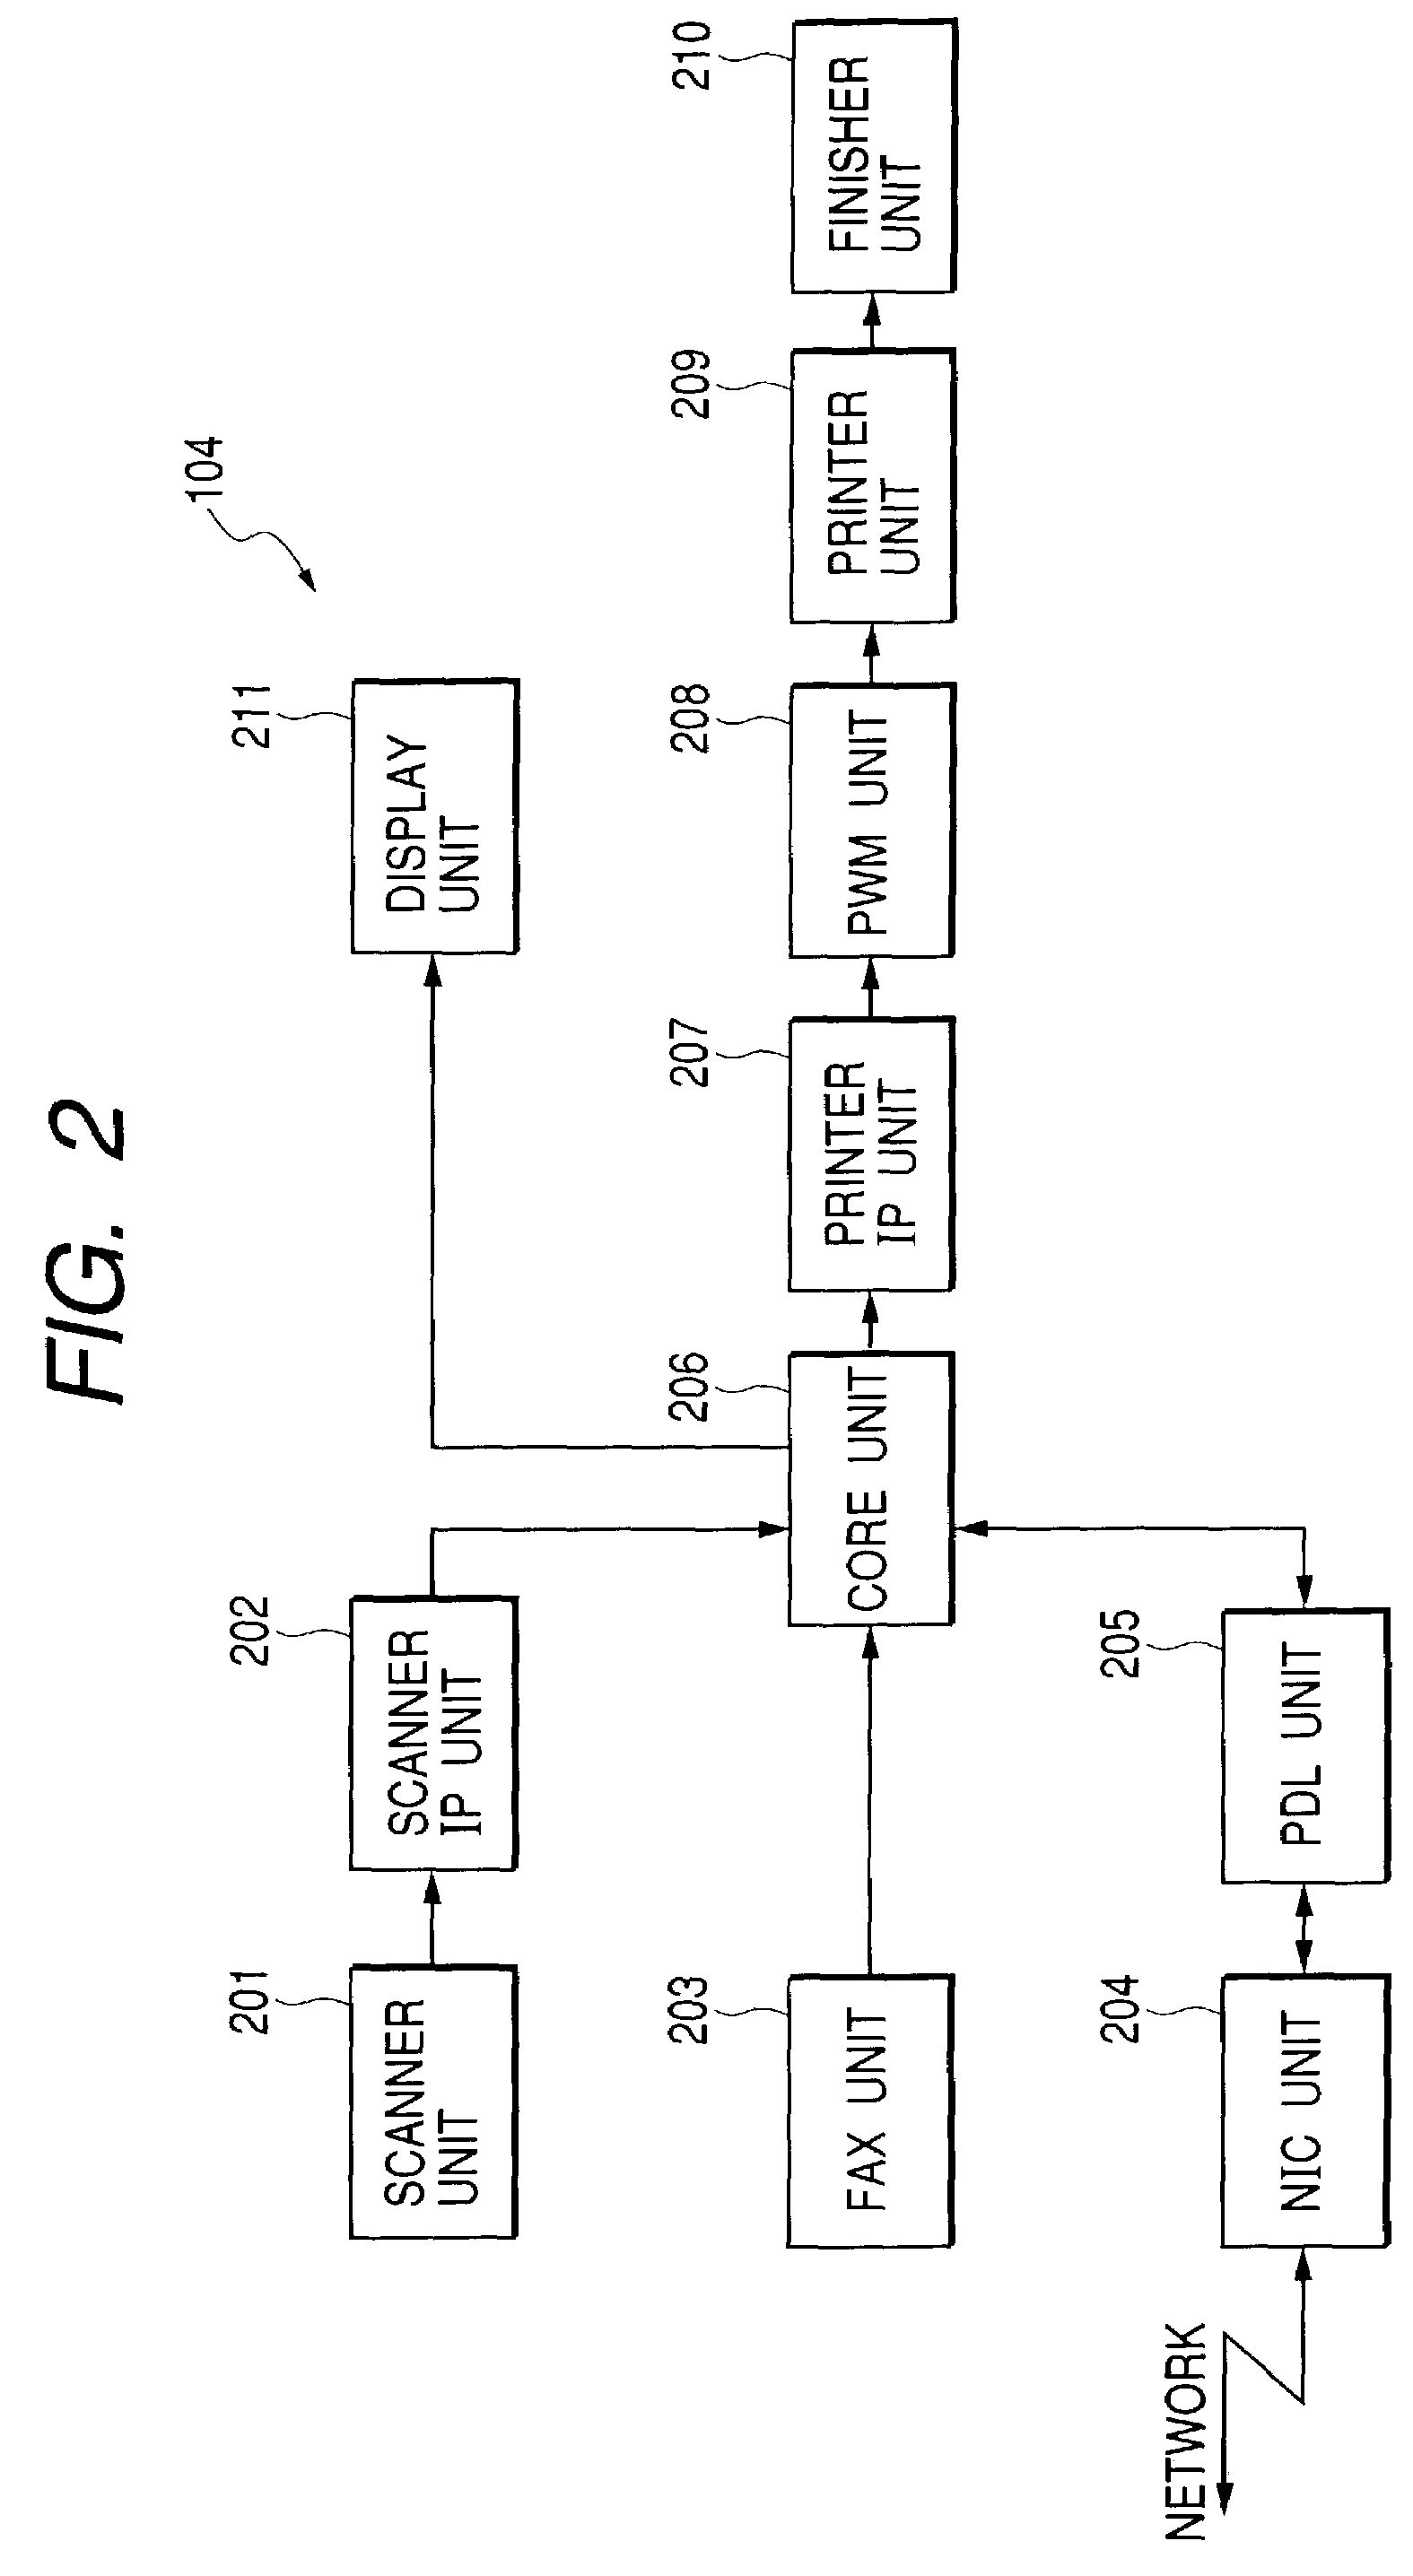 Image forming apparatus having plural image supporting bodies